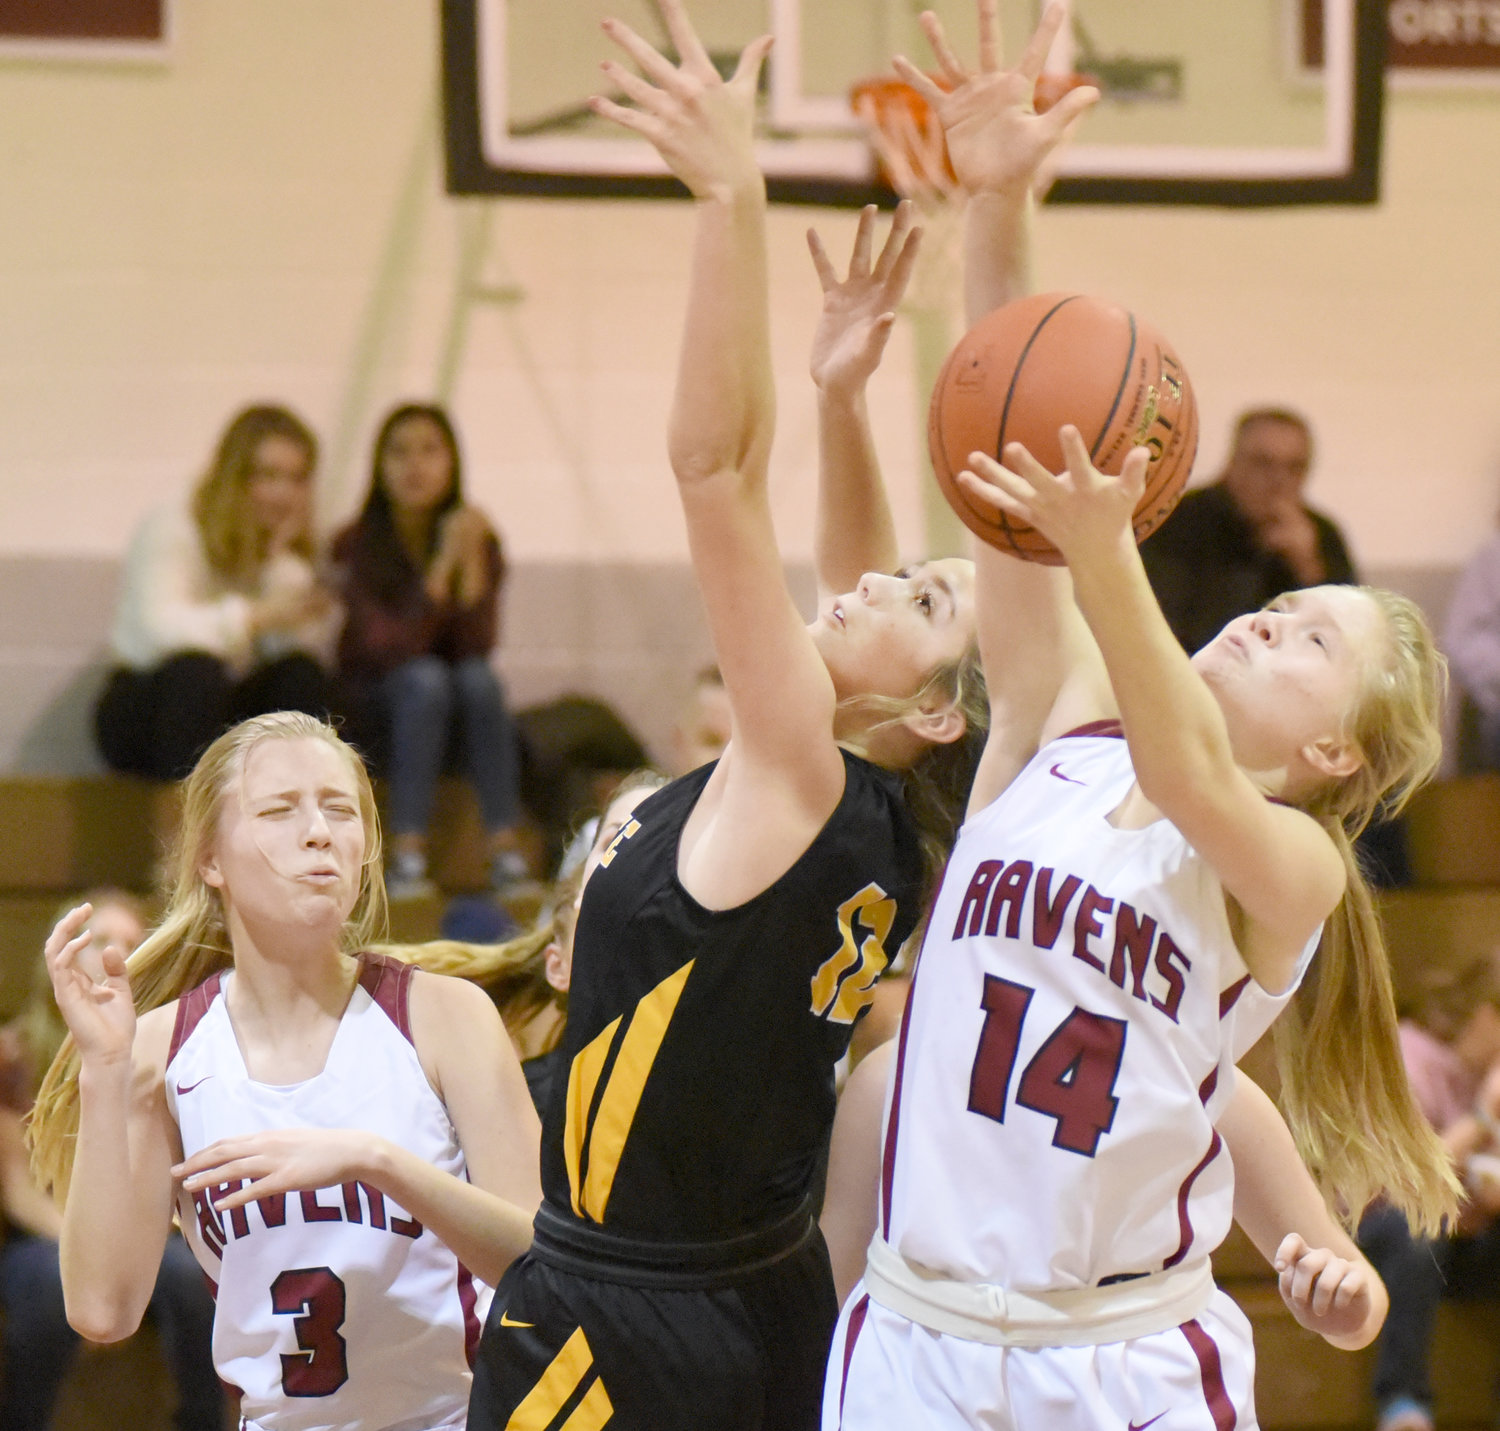 Hillcrest’s Leah Bontrager pulls a rebound away from Lone Tree’s Josie Mullinnex while Sarena Gerber (3) looks on.